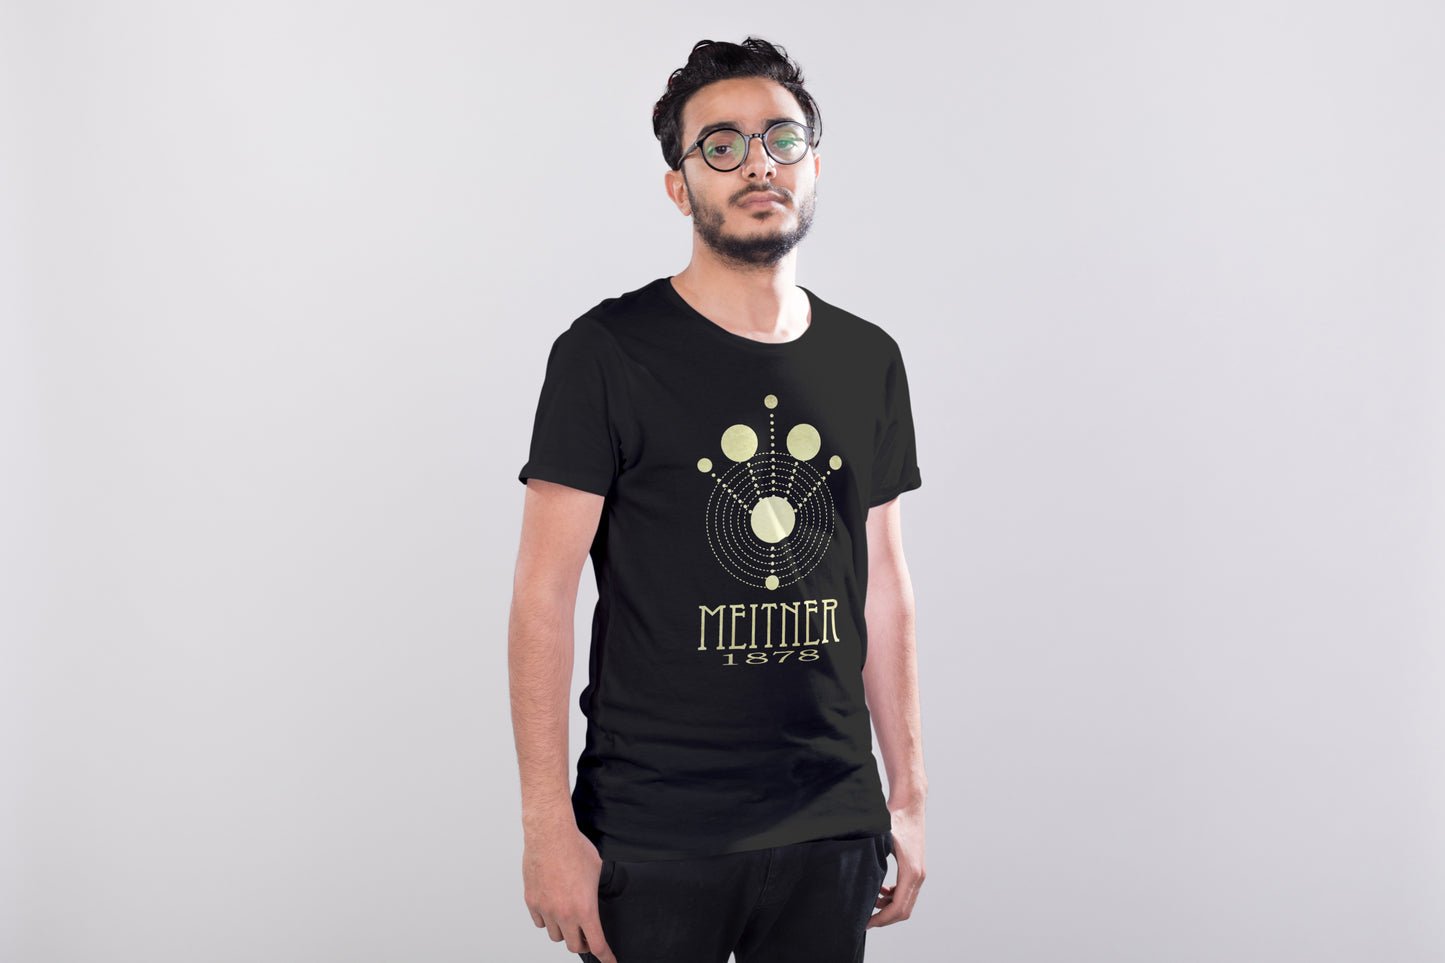 Meitner Physics T-shirt, Lise Meitner Nuclear Fission Graphic Tee